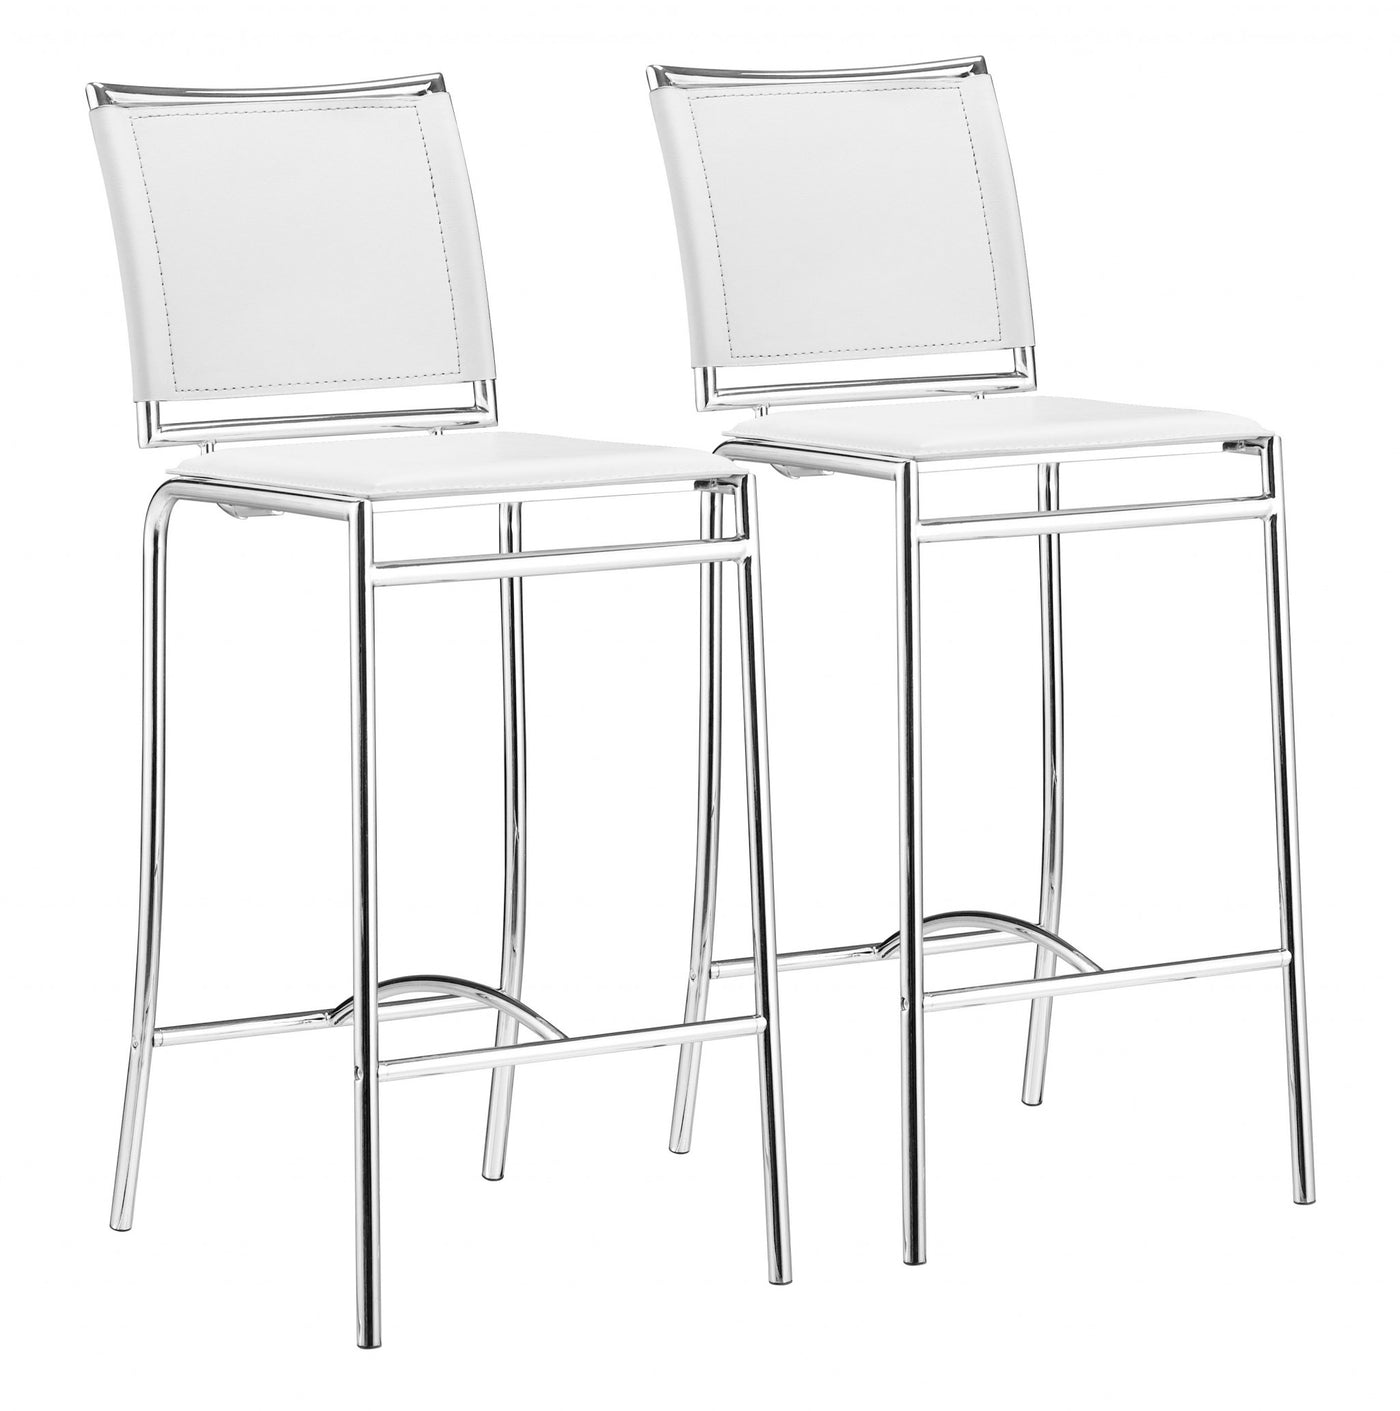 Set Of Two 38" White Steel Low Back Chairs With Footrest